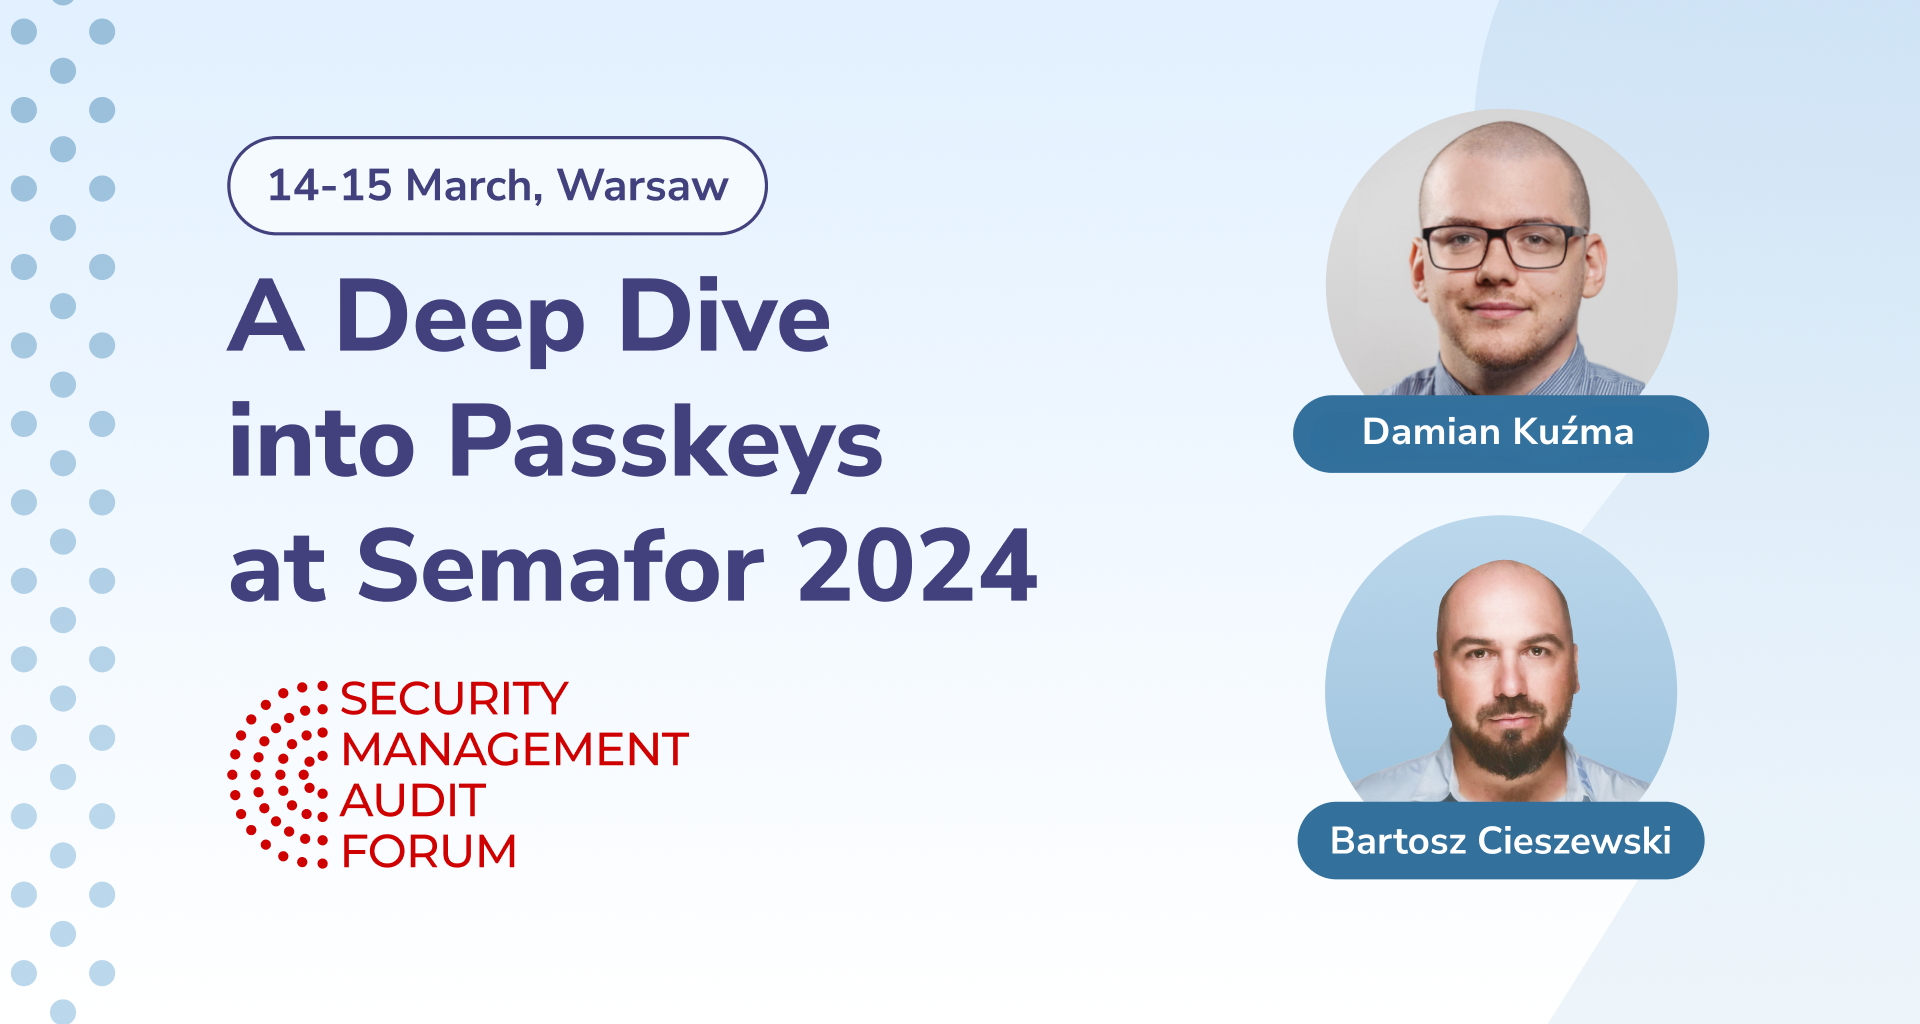 Secfense's Deep Dive into Passkeys at Semafor 2024